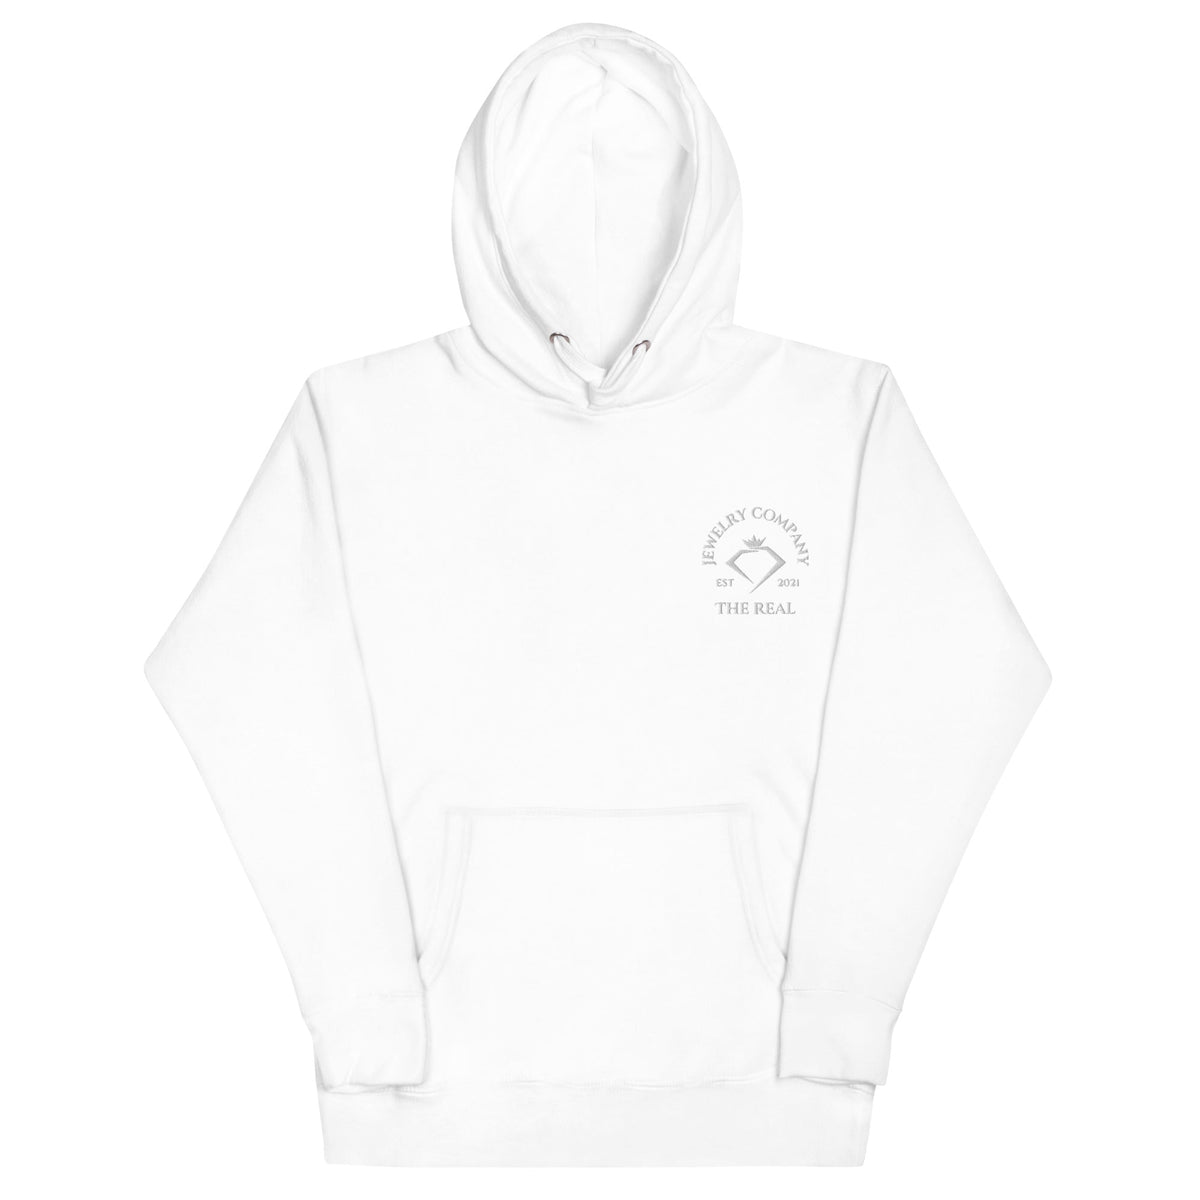 The Real Embordered Hoodie - The Real Jewelry CompanyThe Real Jewelry Company